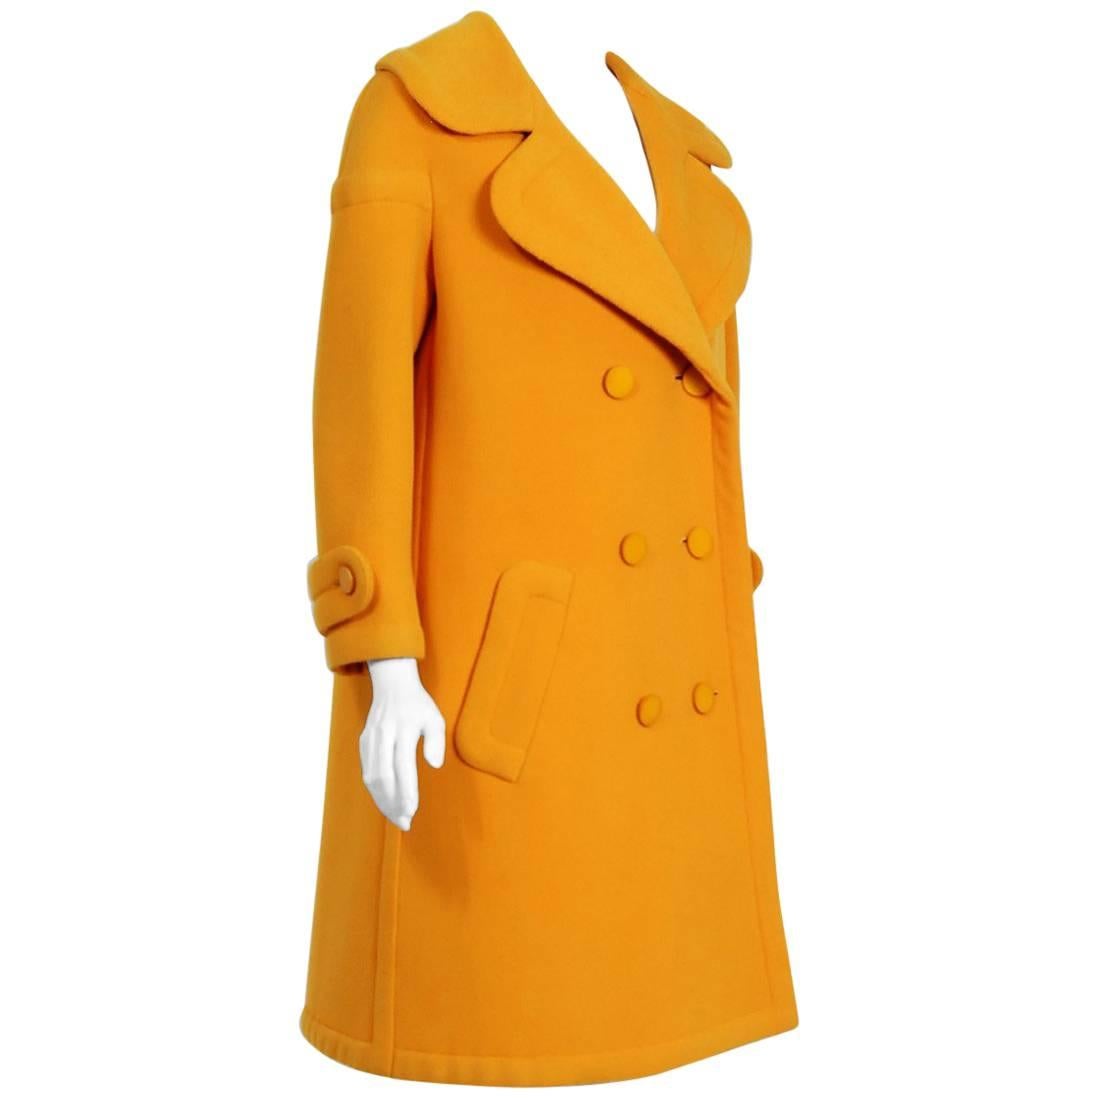 1964 Nina Ricci Haute-Couture Marigold Wool Double Breasted Sculpted Mod Coat